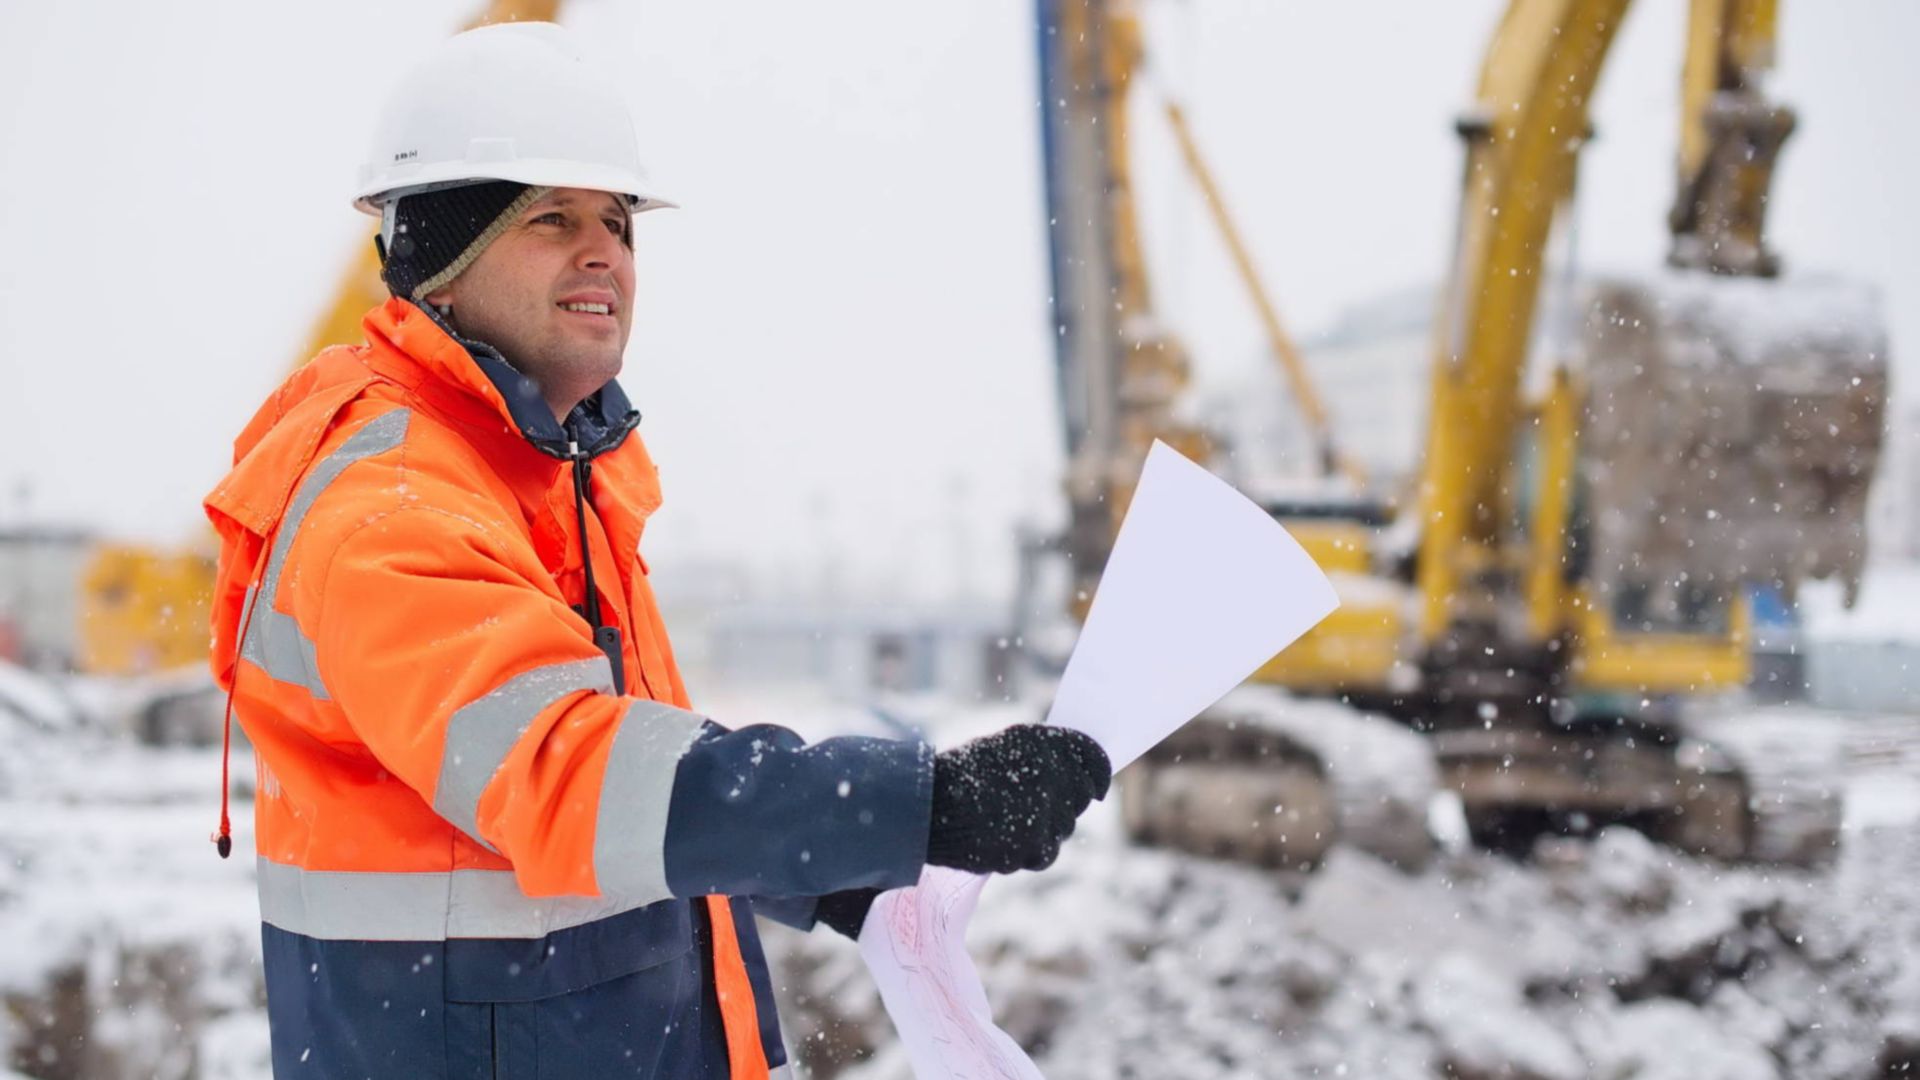 Civil engineer at construction site is inspecting ongoing works according to design drawings in difficult winter conditions